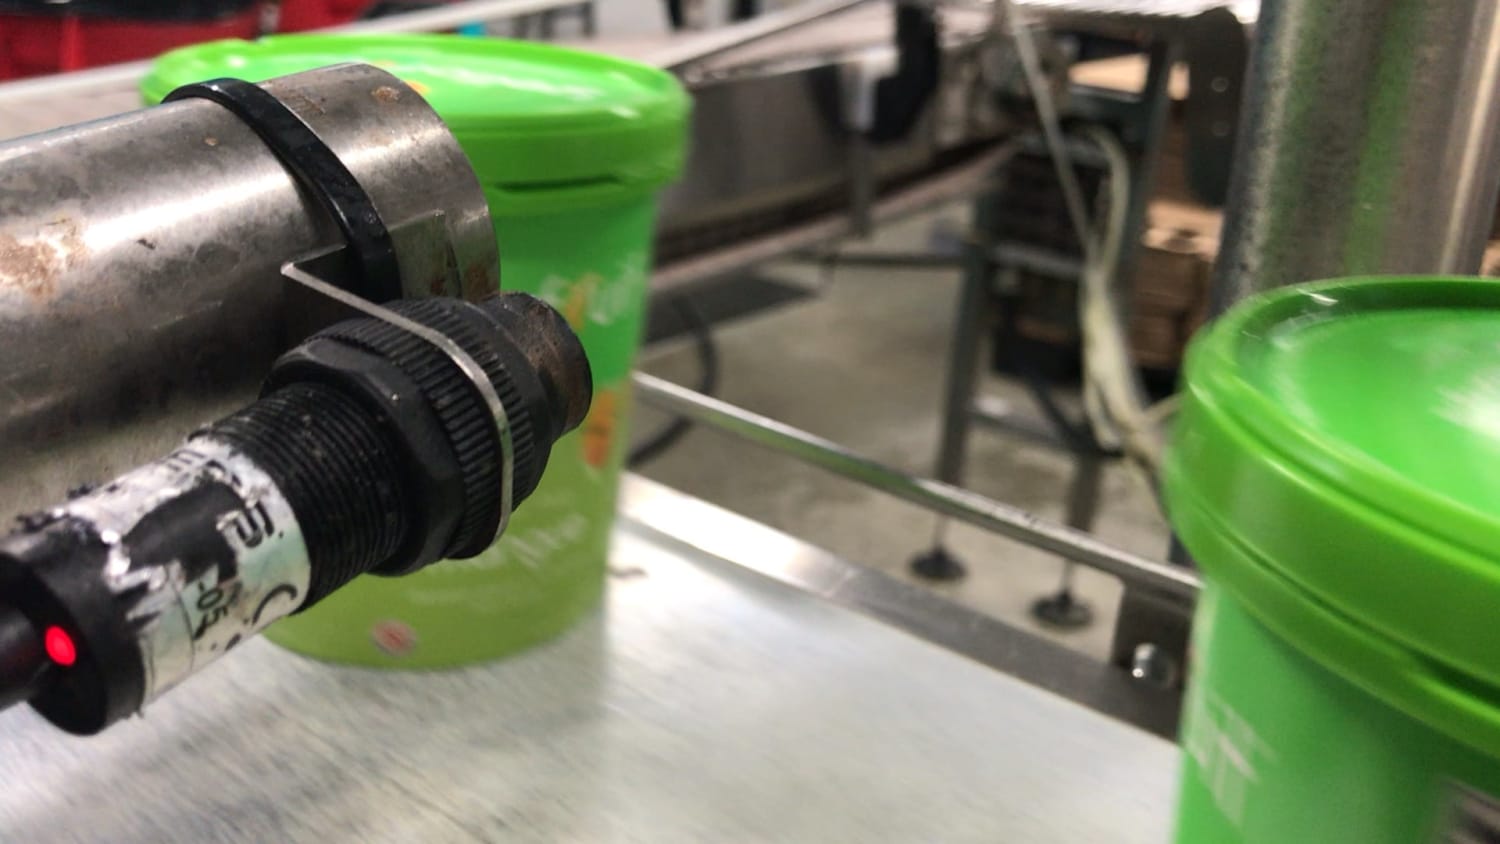 Manufacturing a non-dairy ice cream in 500ml tubs with lids and date code.